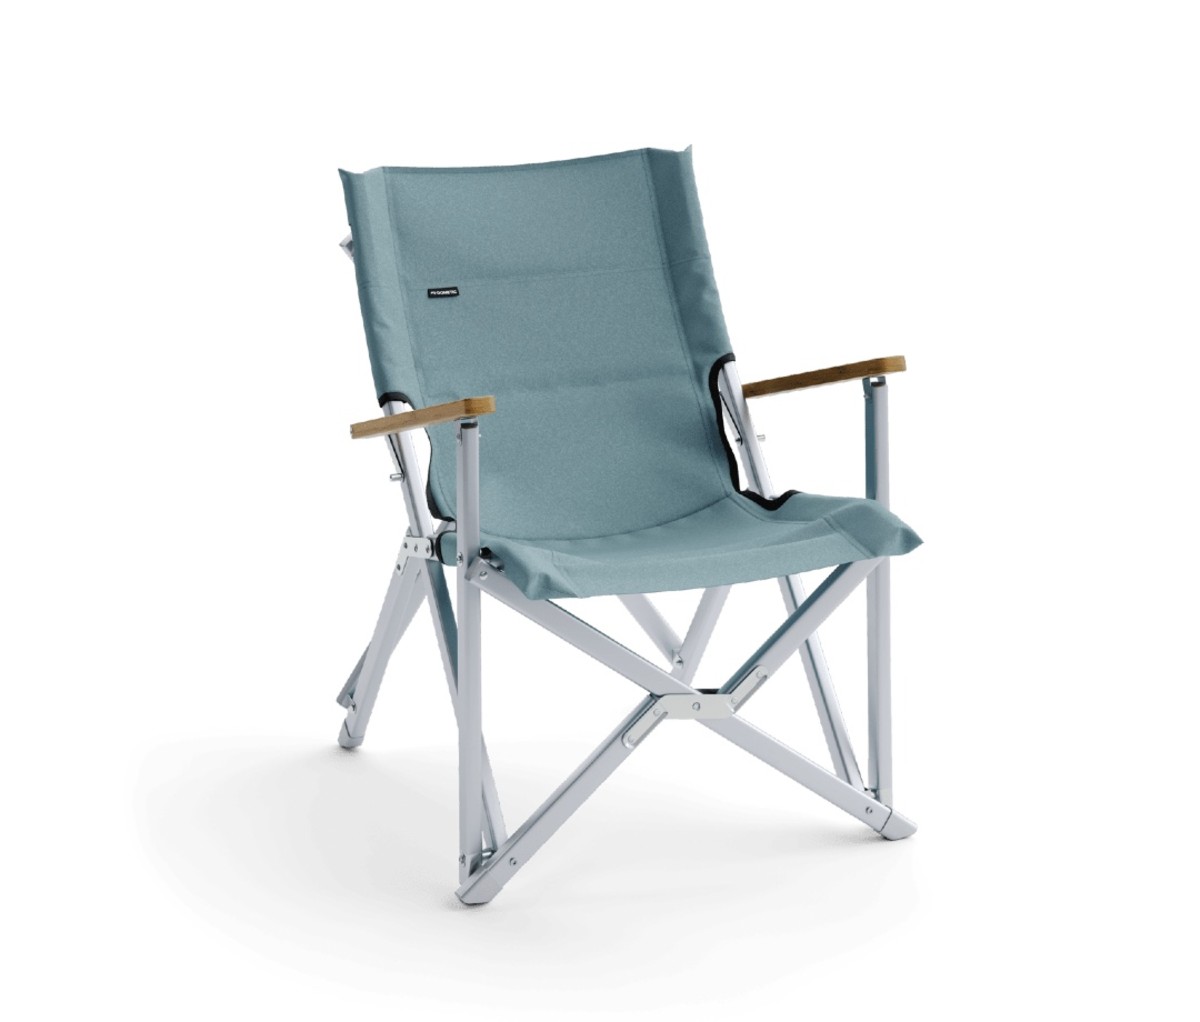 Sit pretty at your tailgate party with the Dometic GO camping chair.